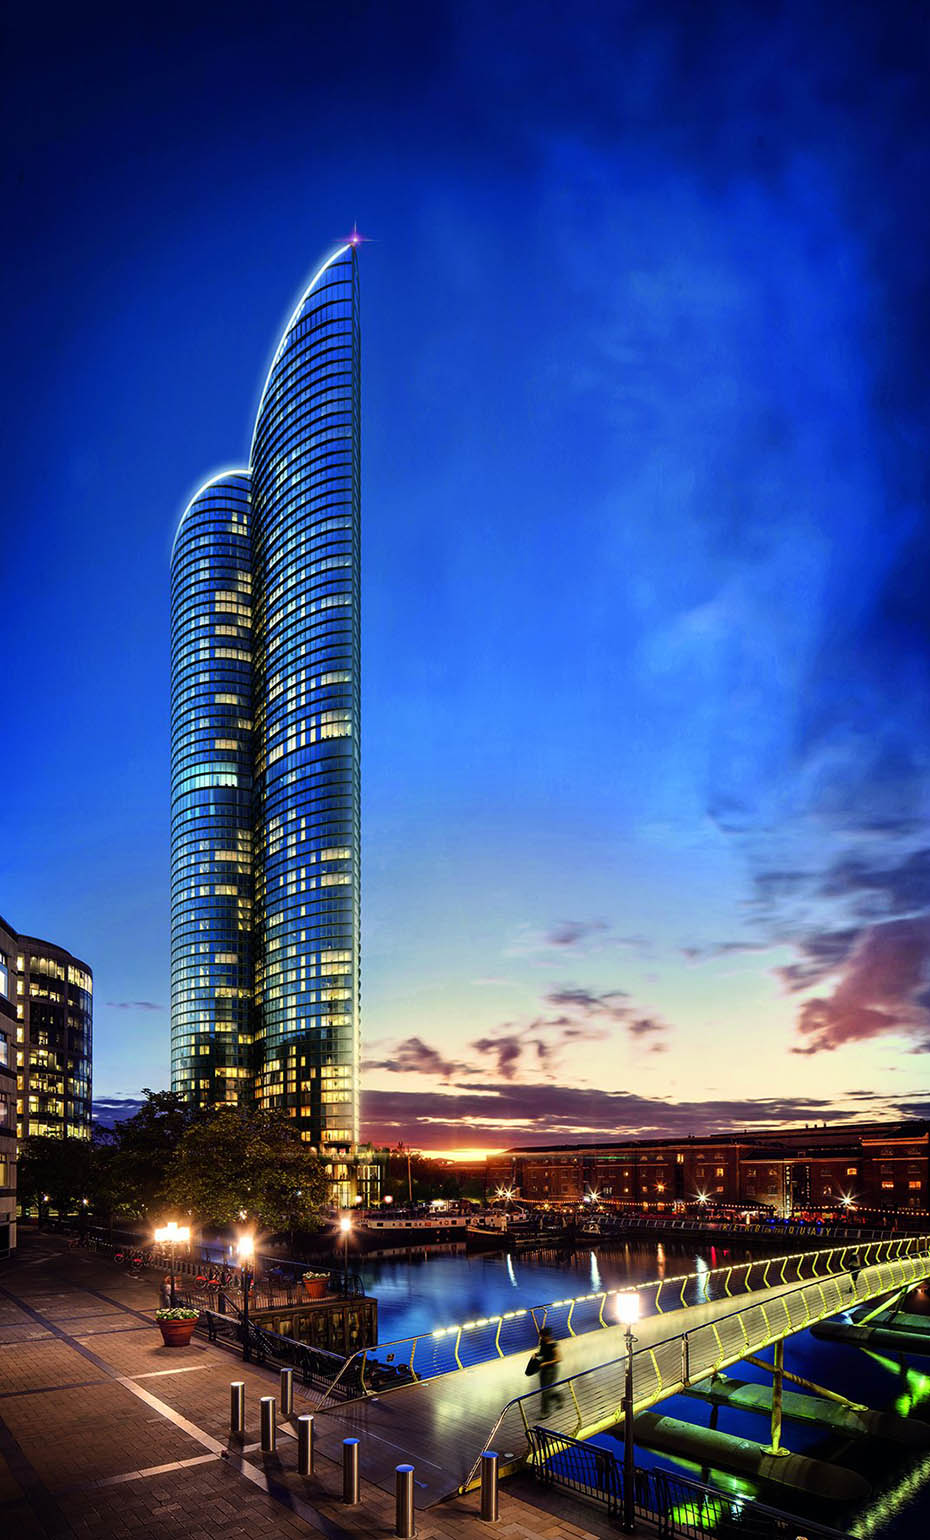 the-67-storey-high-tower-will-be-valued-in-excess-of-800-million-and-provide-861-apartments.jpg